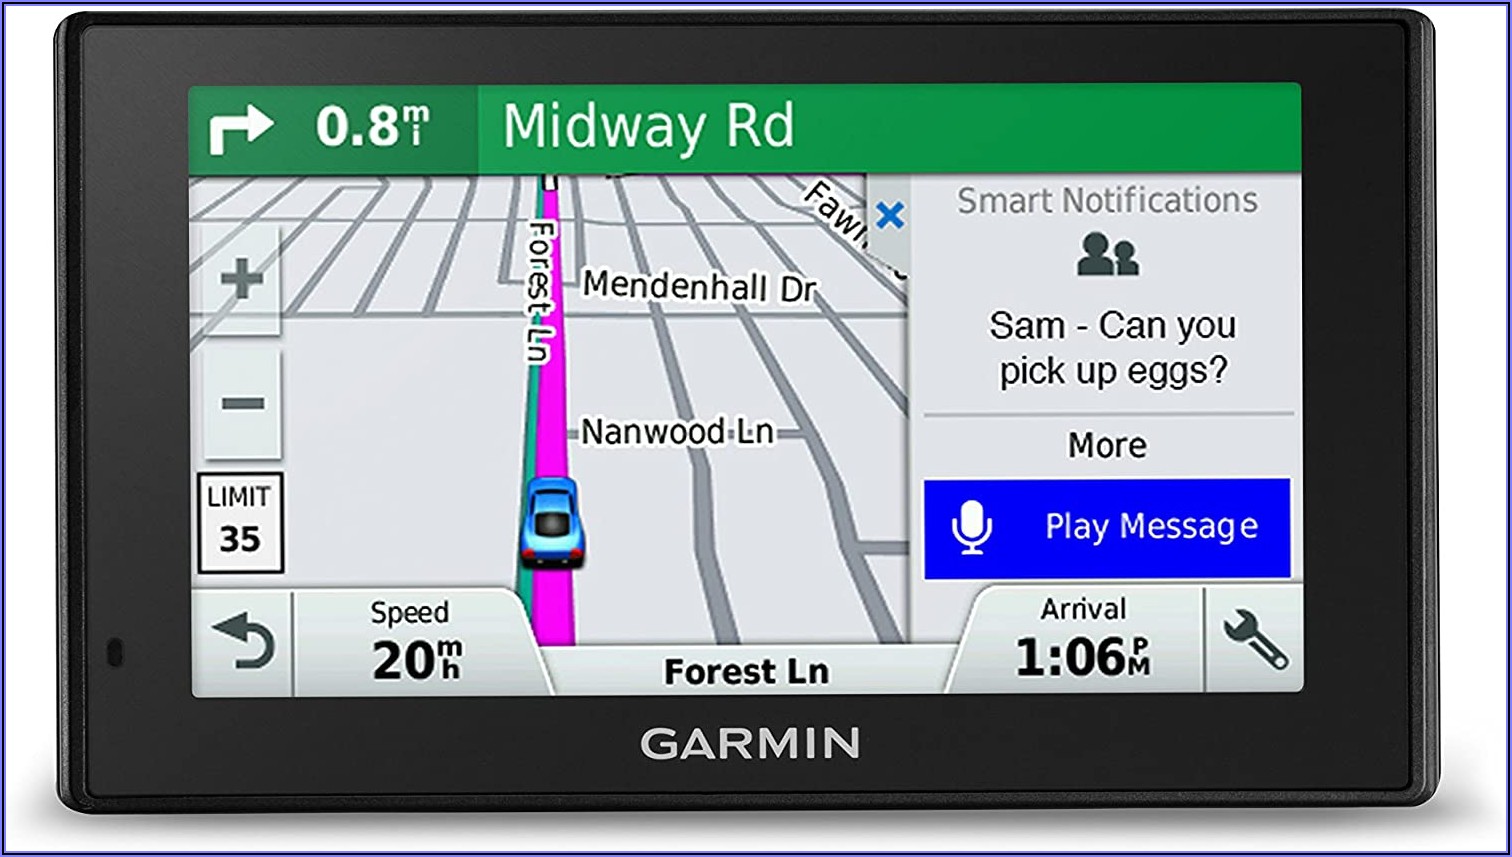 Garmin Smart Gps With Voice Command Wifi And Lifetime Maps And Traffic